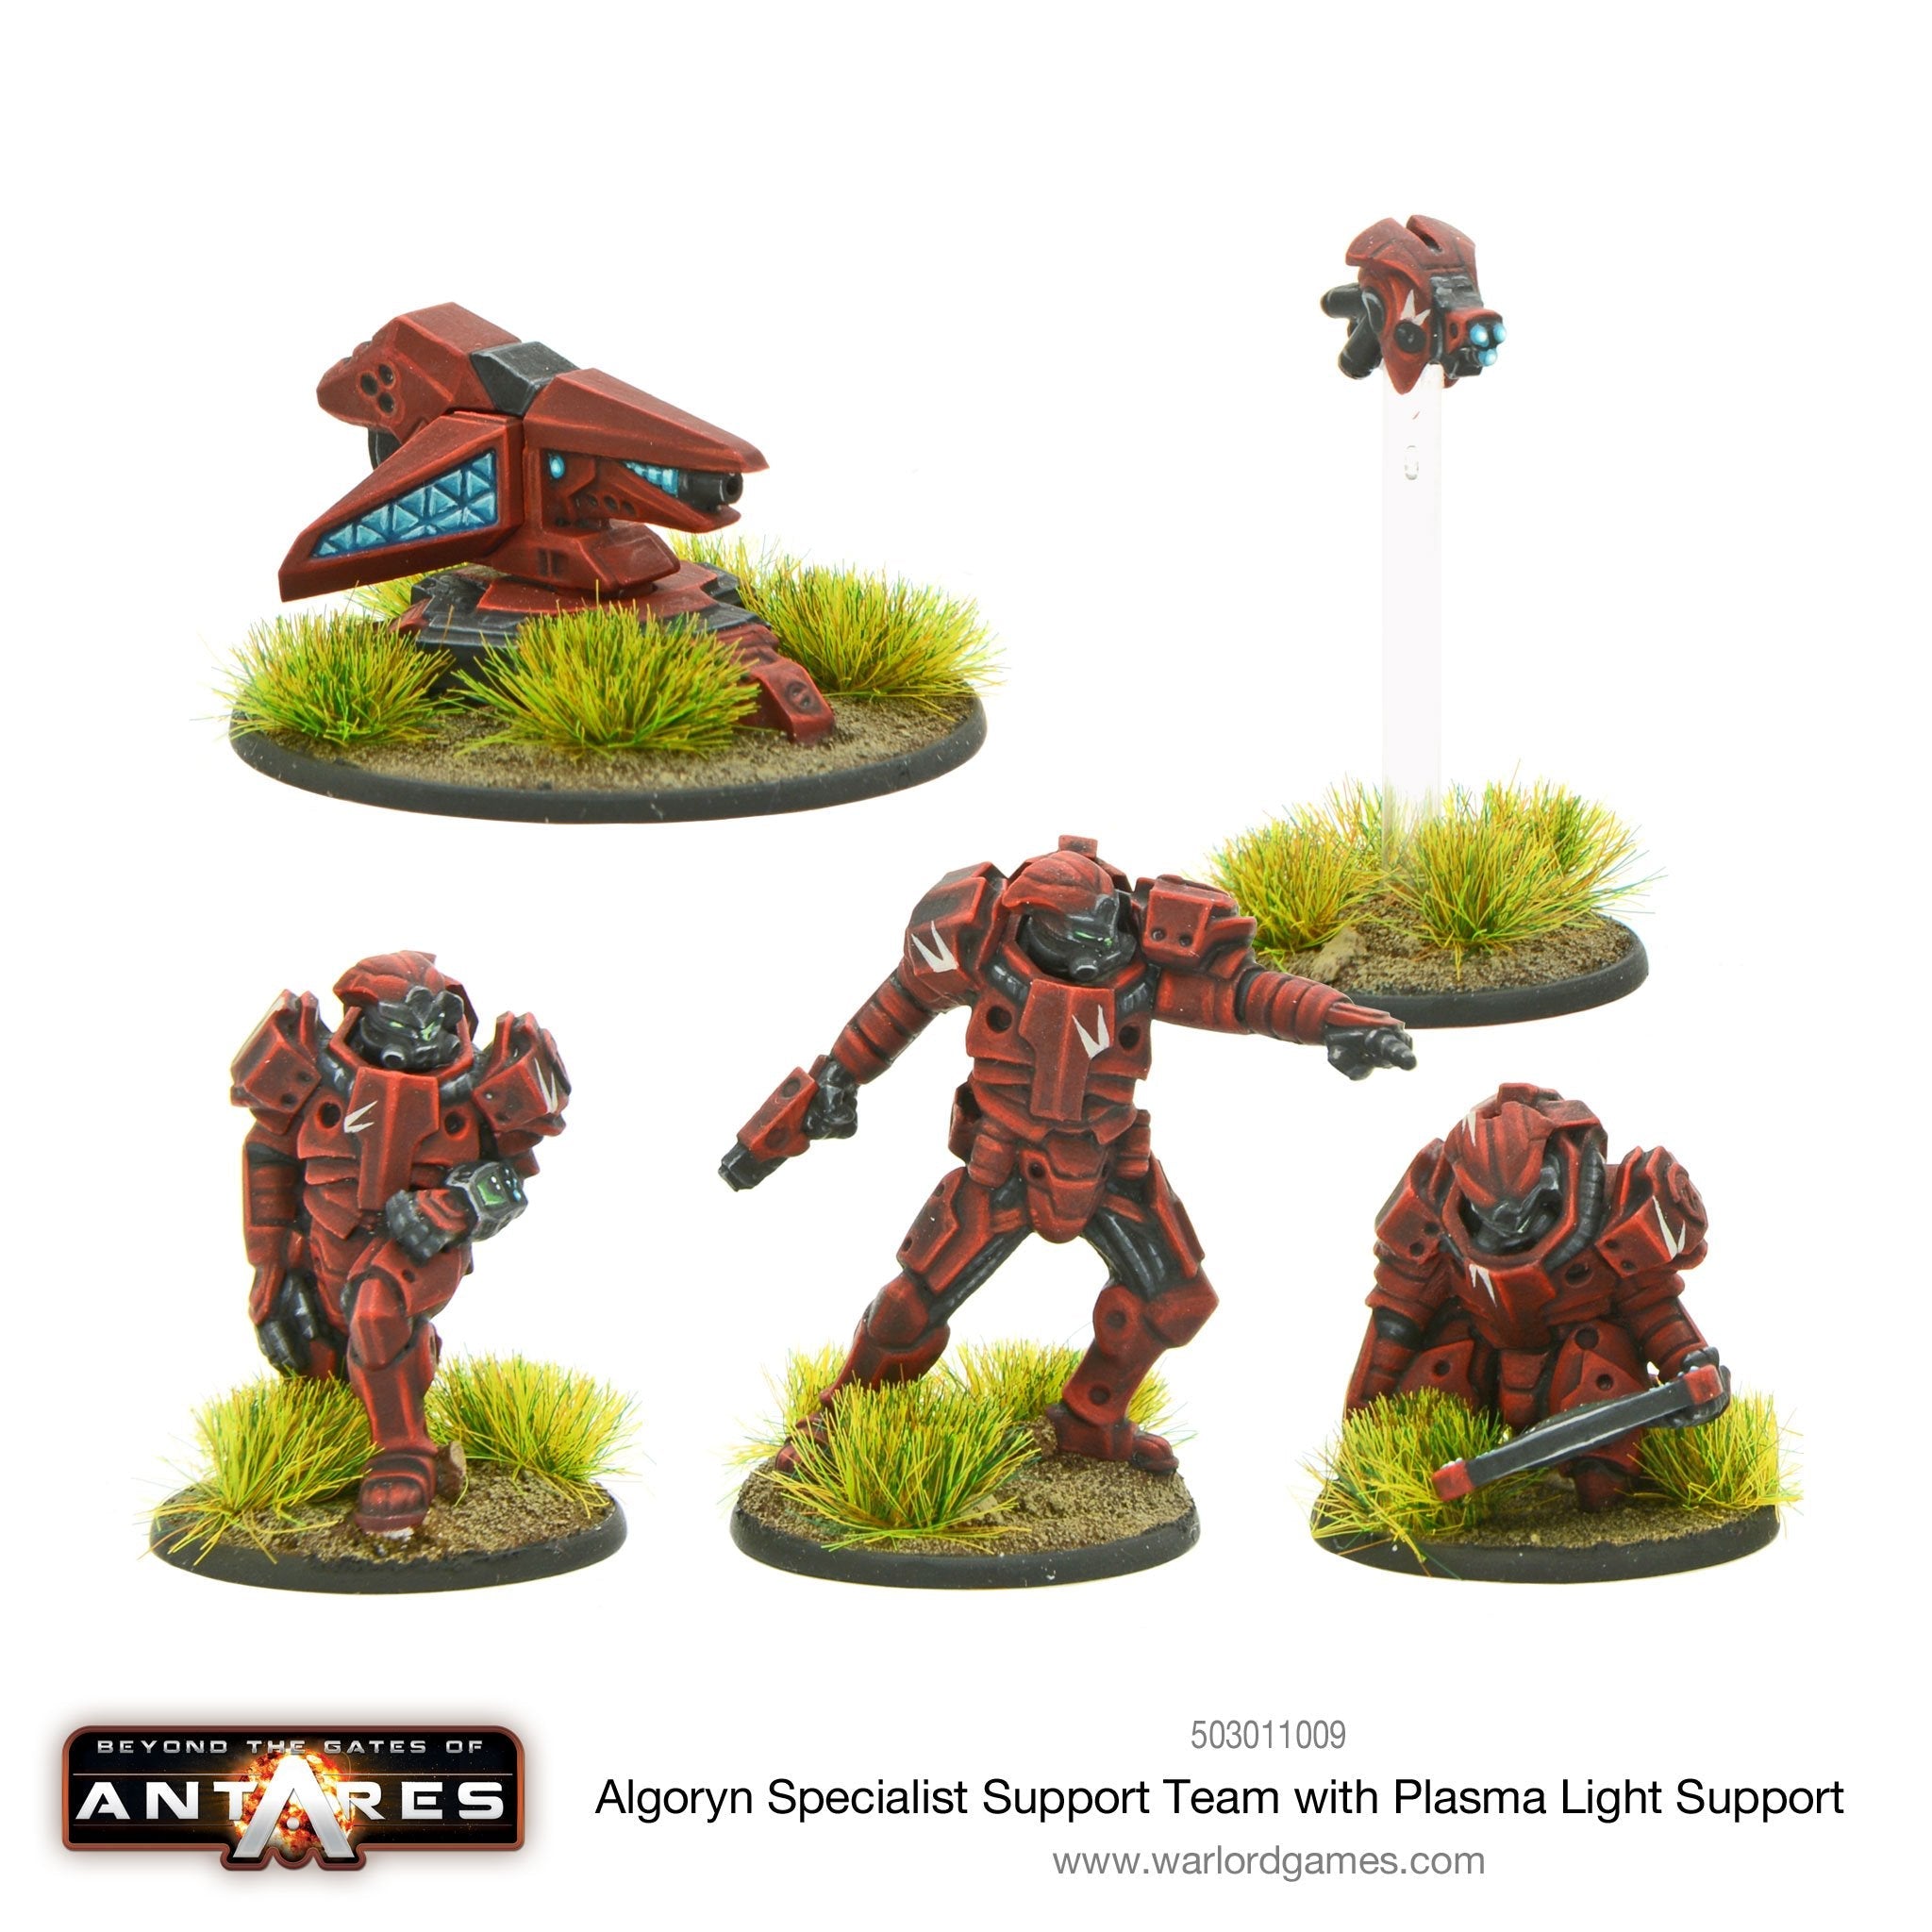 Algoryn specialist support team with plasma light support